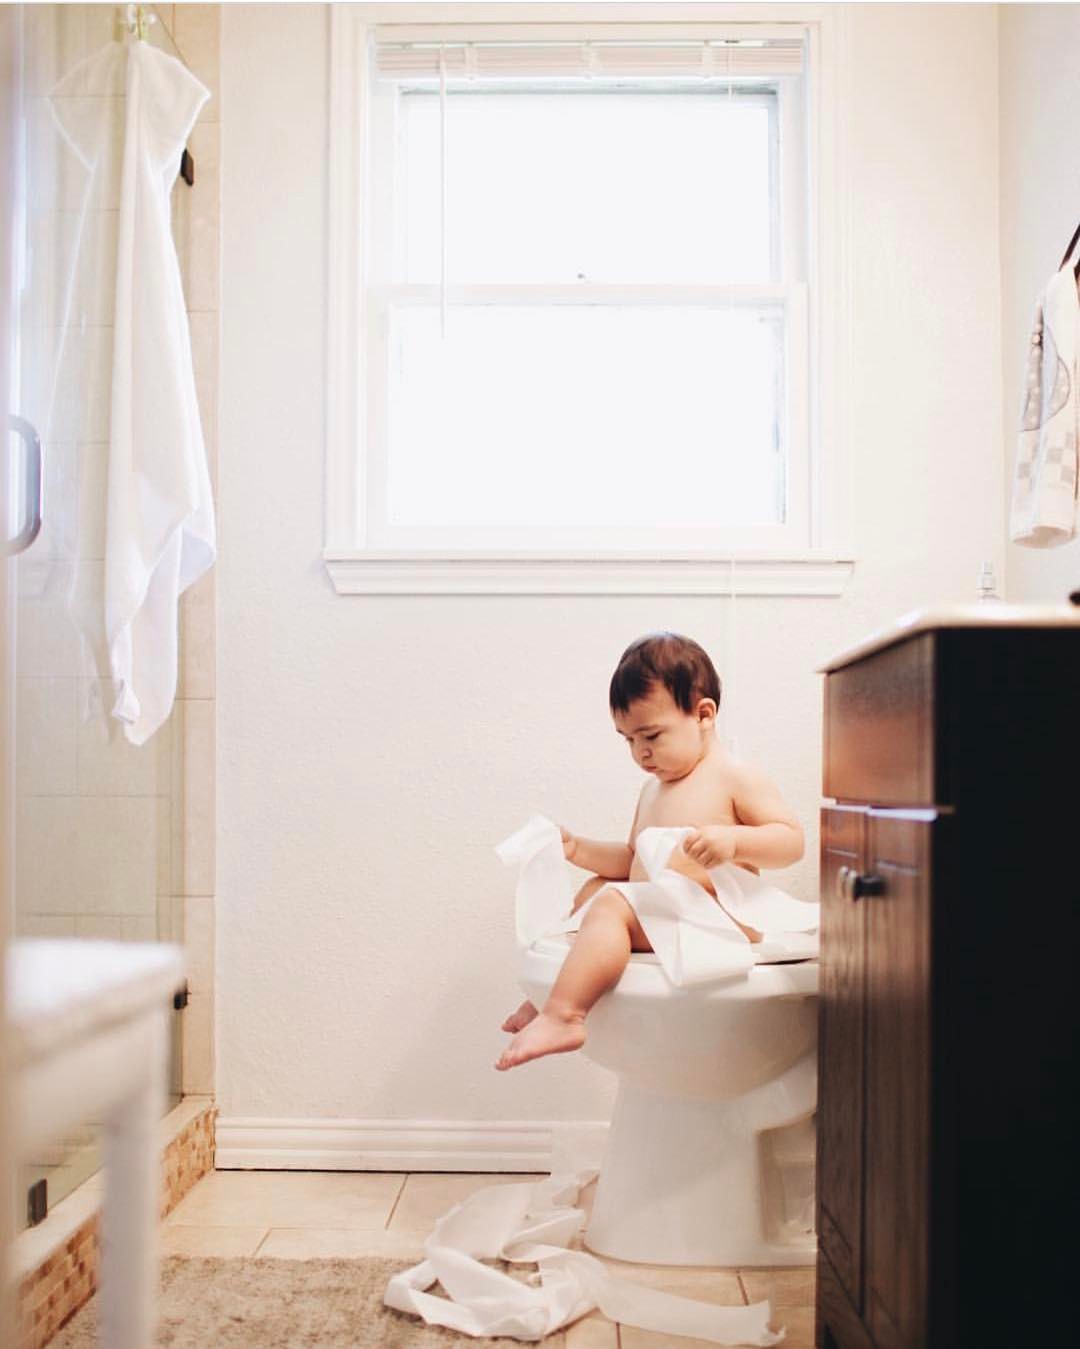 How Do You Know When Your Child is Ready for Potty Training?